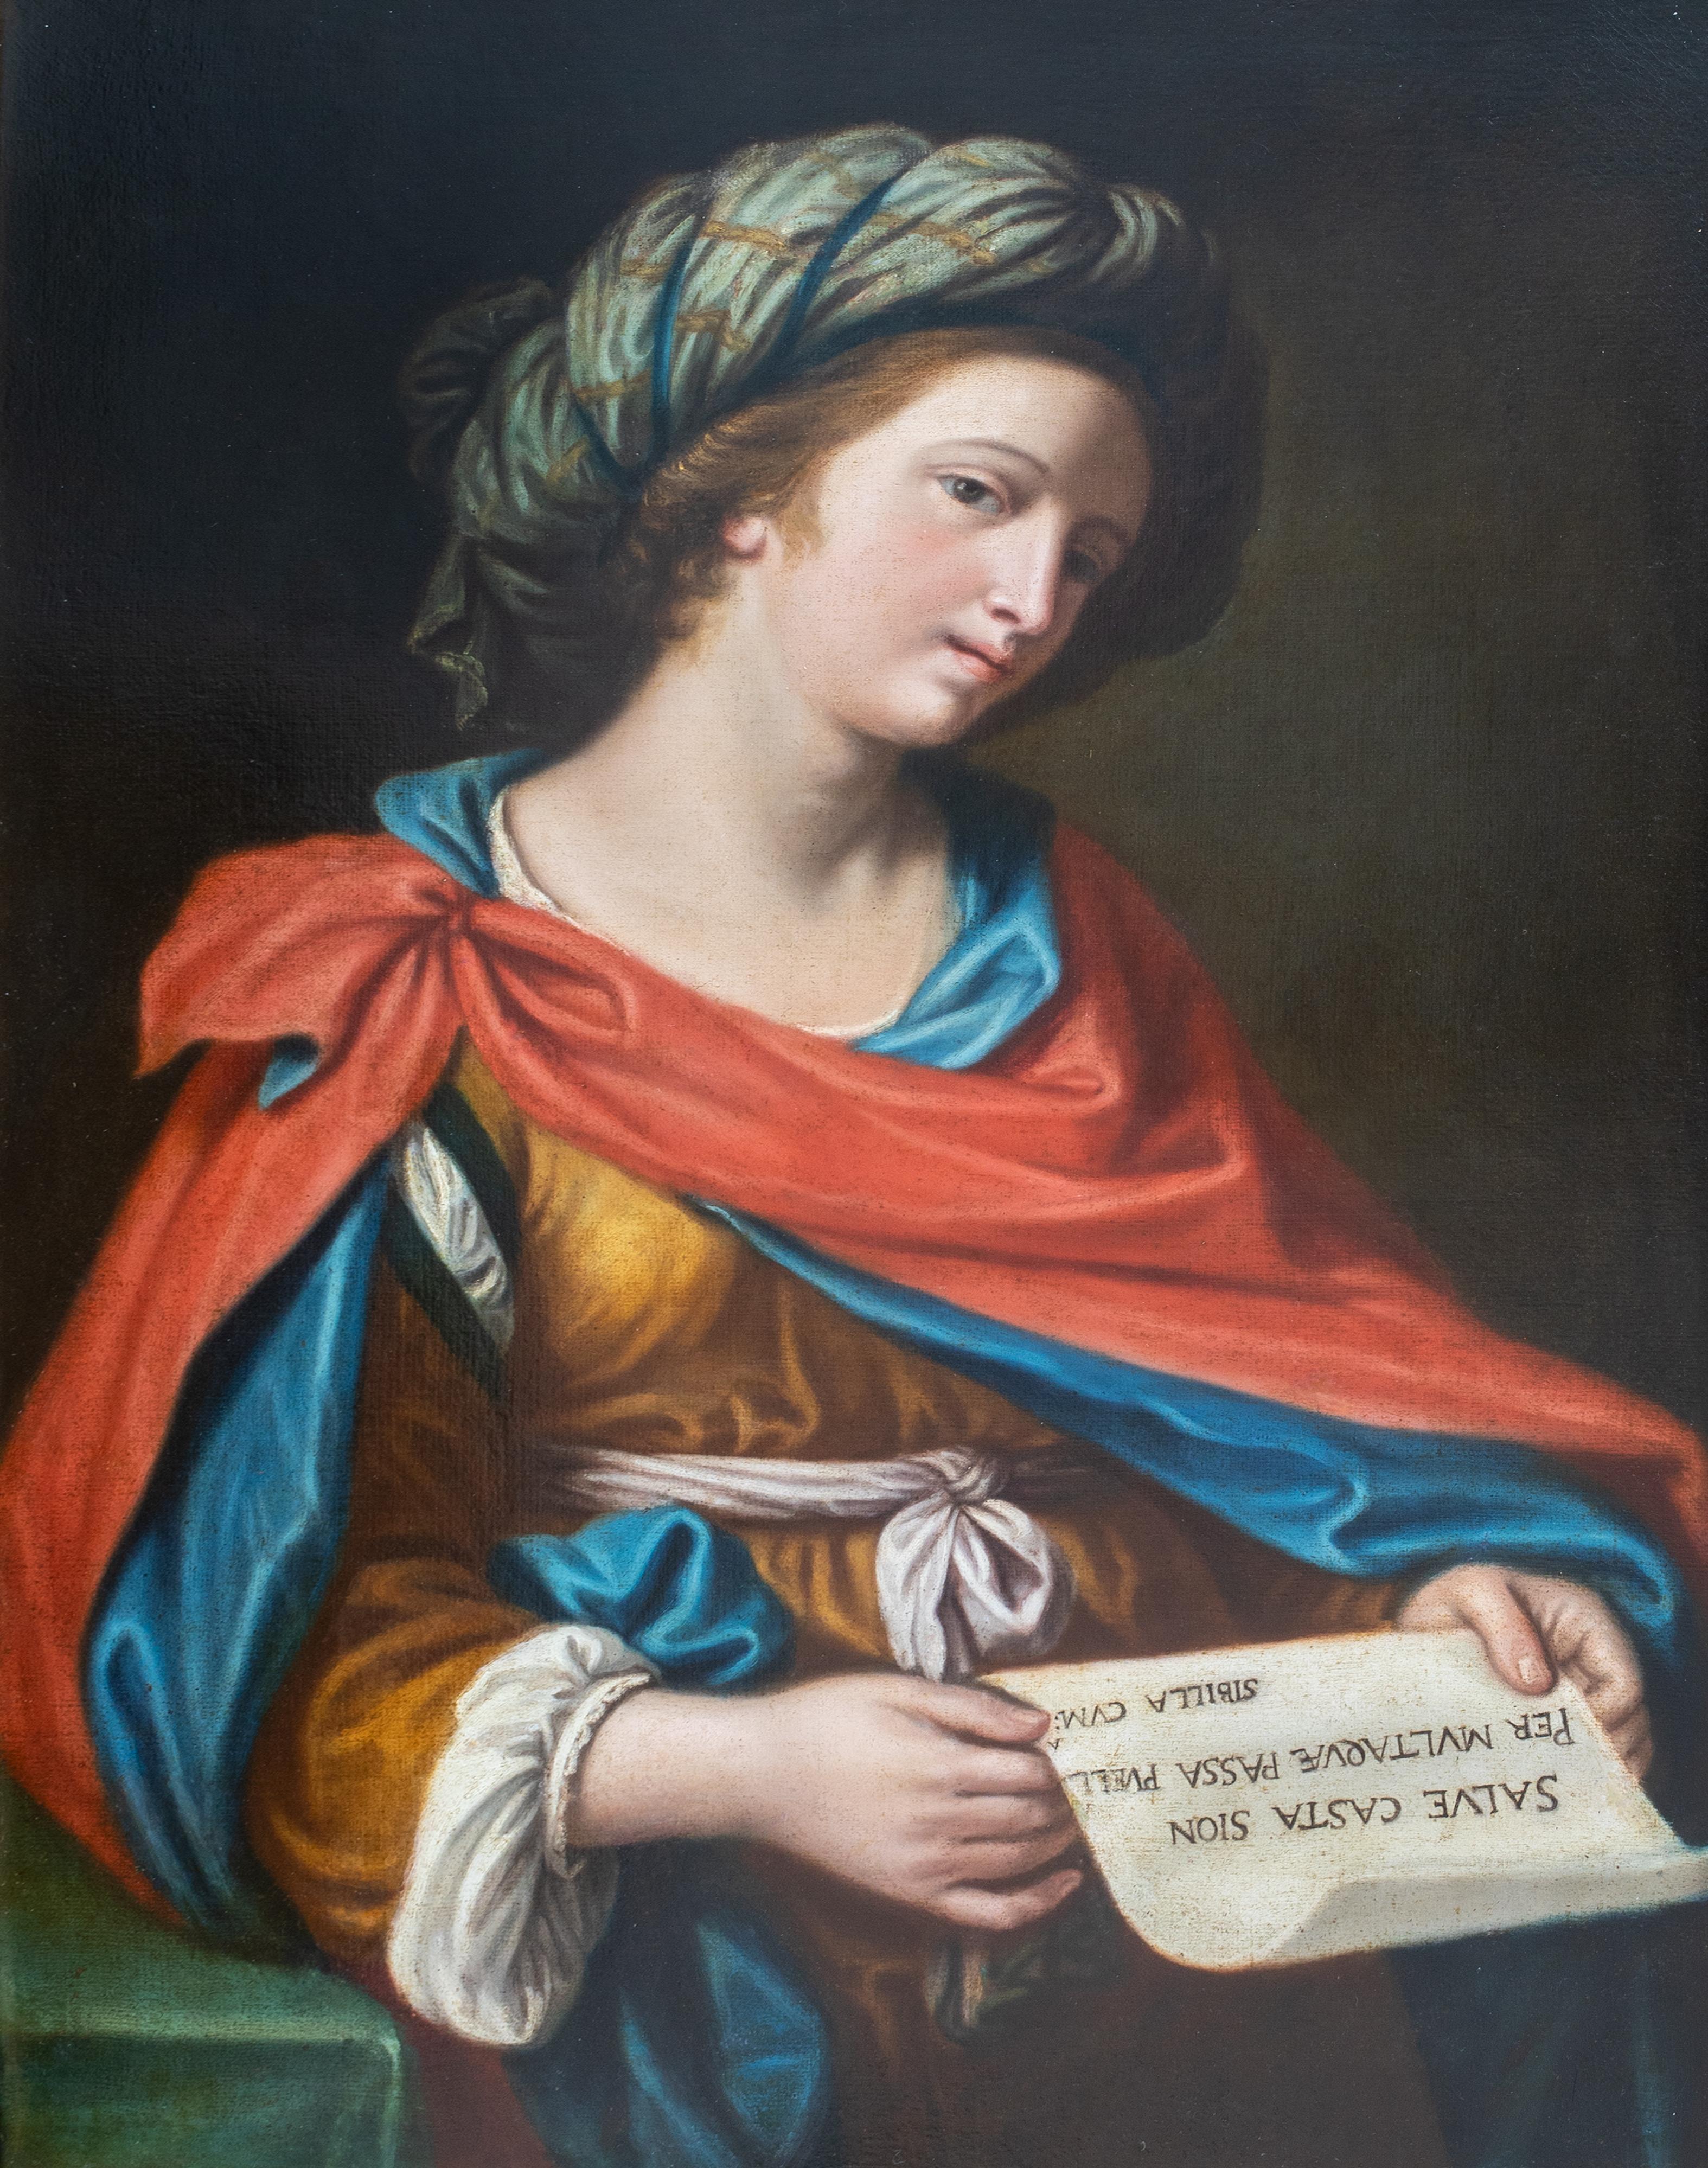 Portrait Of The Persian Sybil, 17th Century 

School of GUERCINO (1591-1666)

Large 17th Century Italian Old Master portrait of the Persian Sybil, oil on canvas. Excellent quality and condition depiction of the Persian mystic and oracle presented in